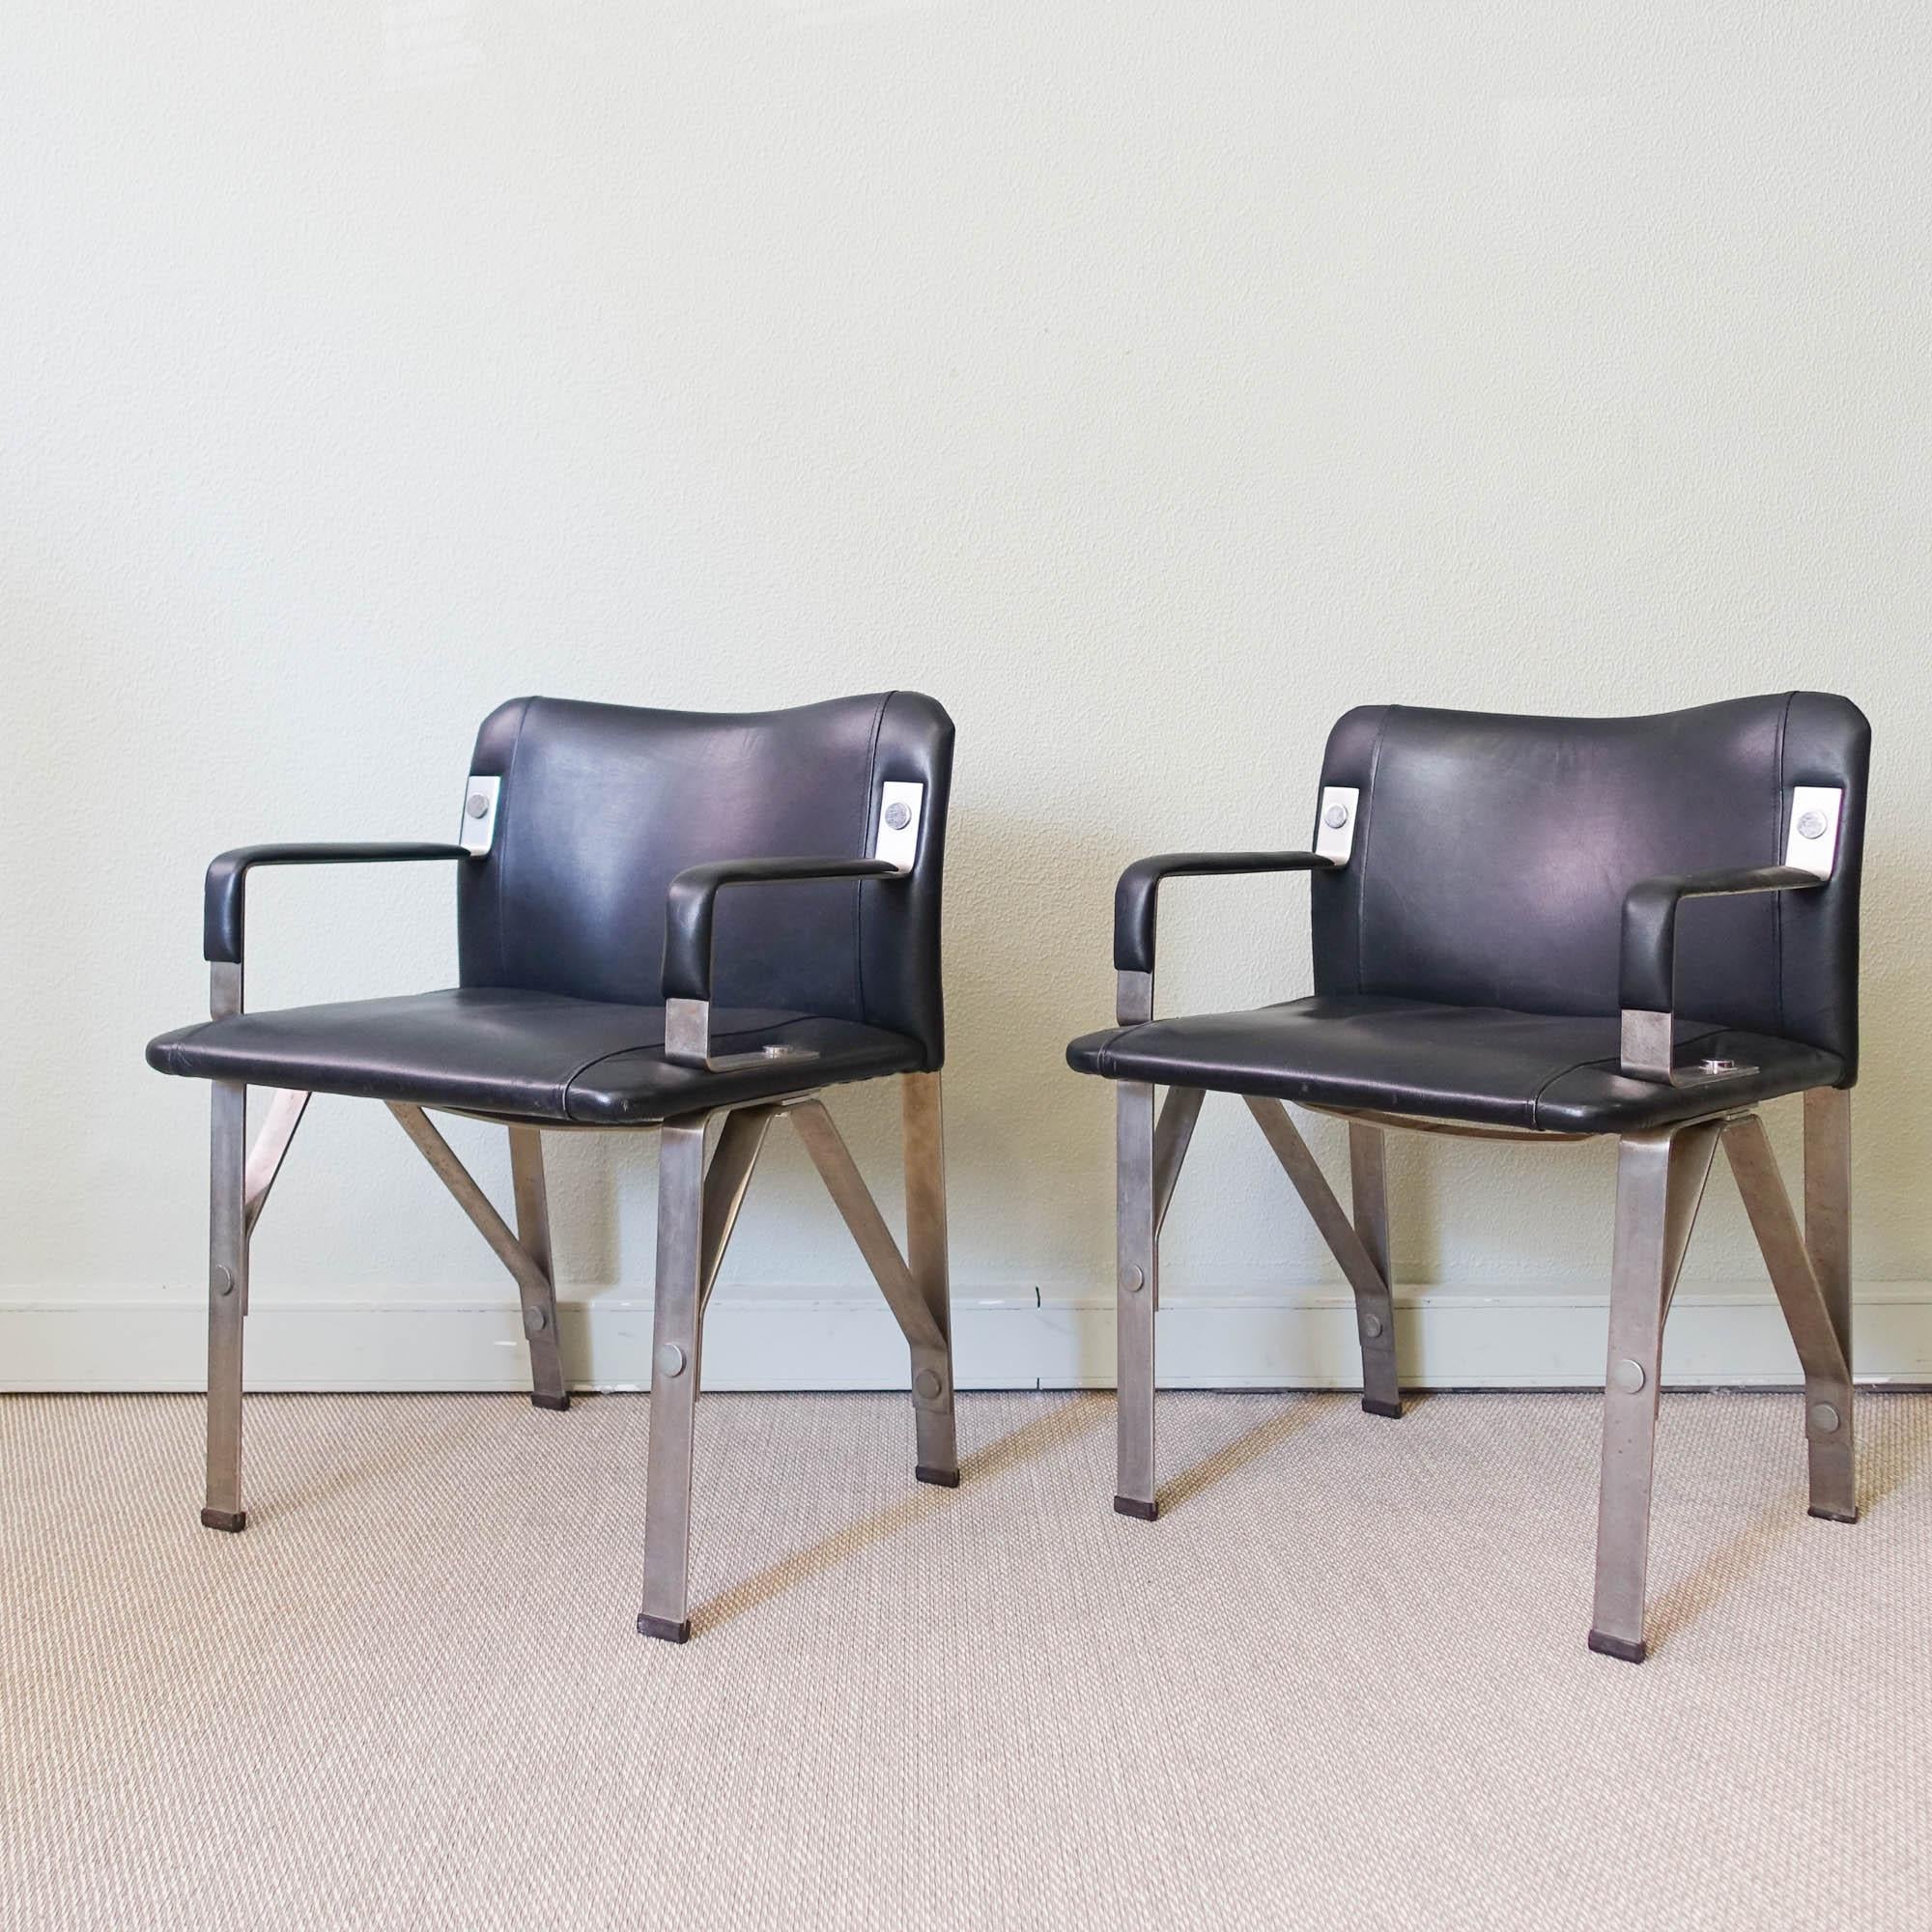 Portuguese Brutalist Pair of Armchairs by Gilberto Lopes, 1970's